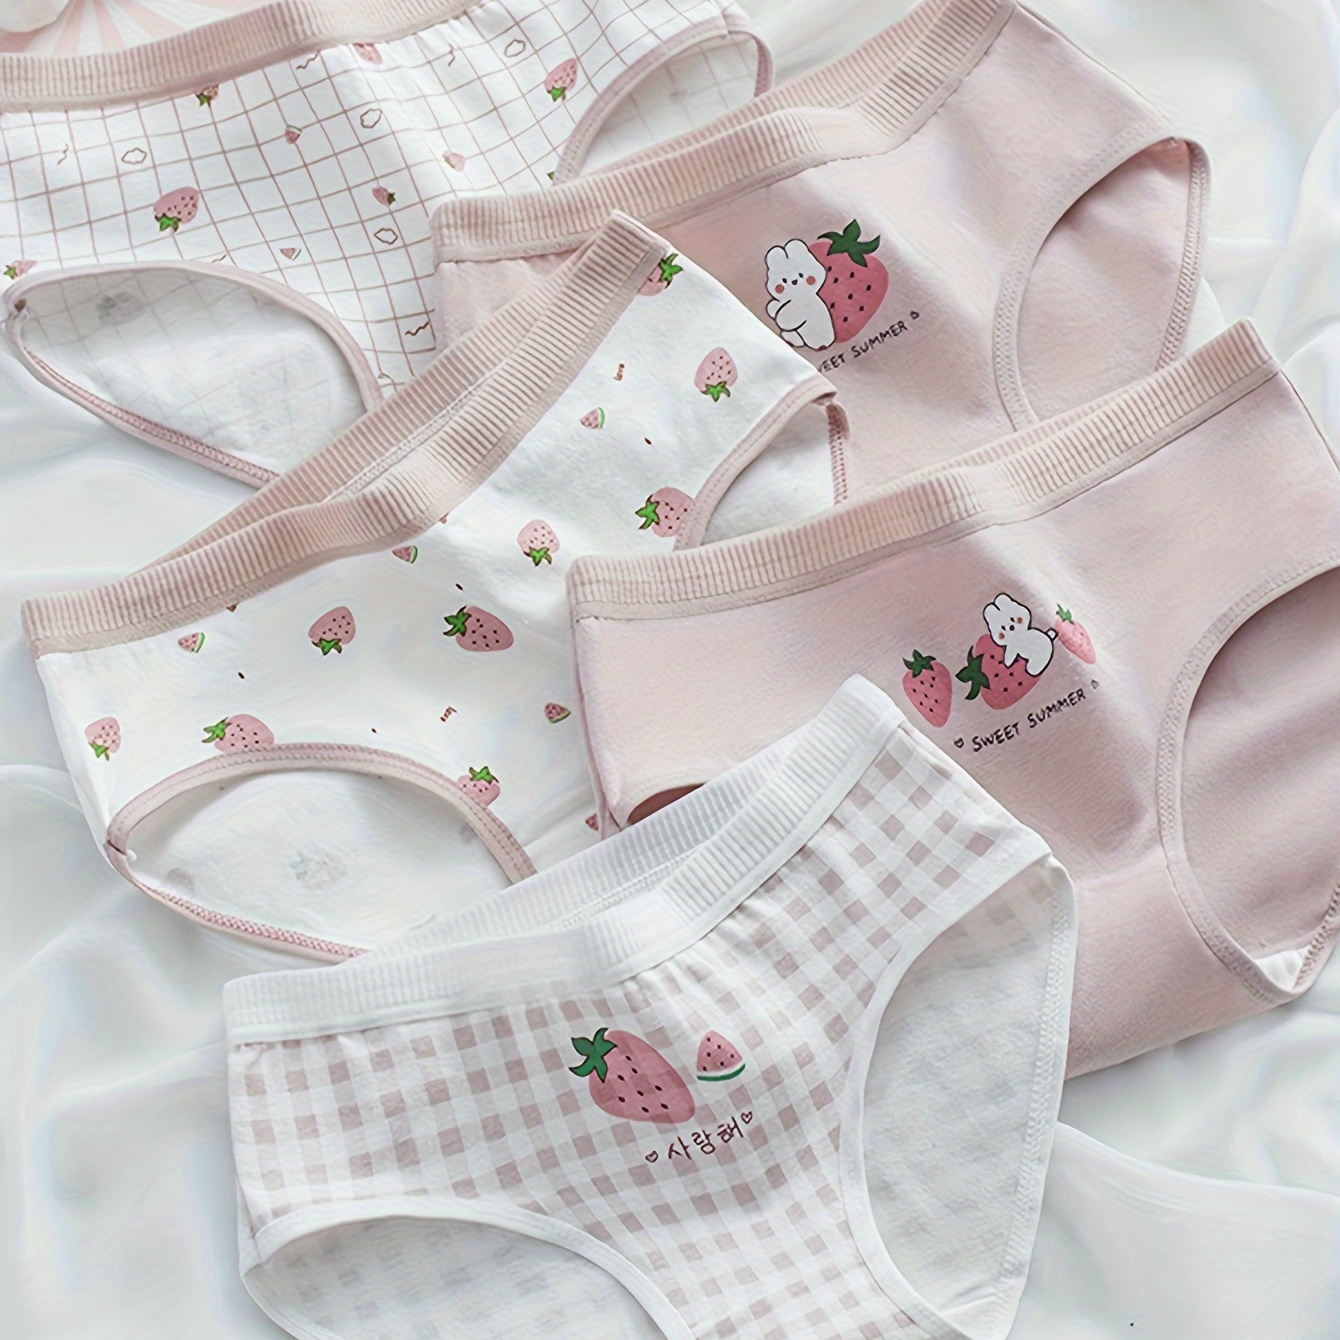 

Korean Style Pink Series 4 Pcs Girl's Cute Rabbit & Strawberry Print Triangle Panties, Comfy Cotton Underwear For Daily Wearing